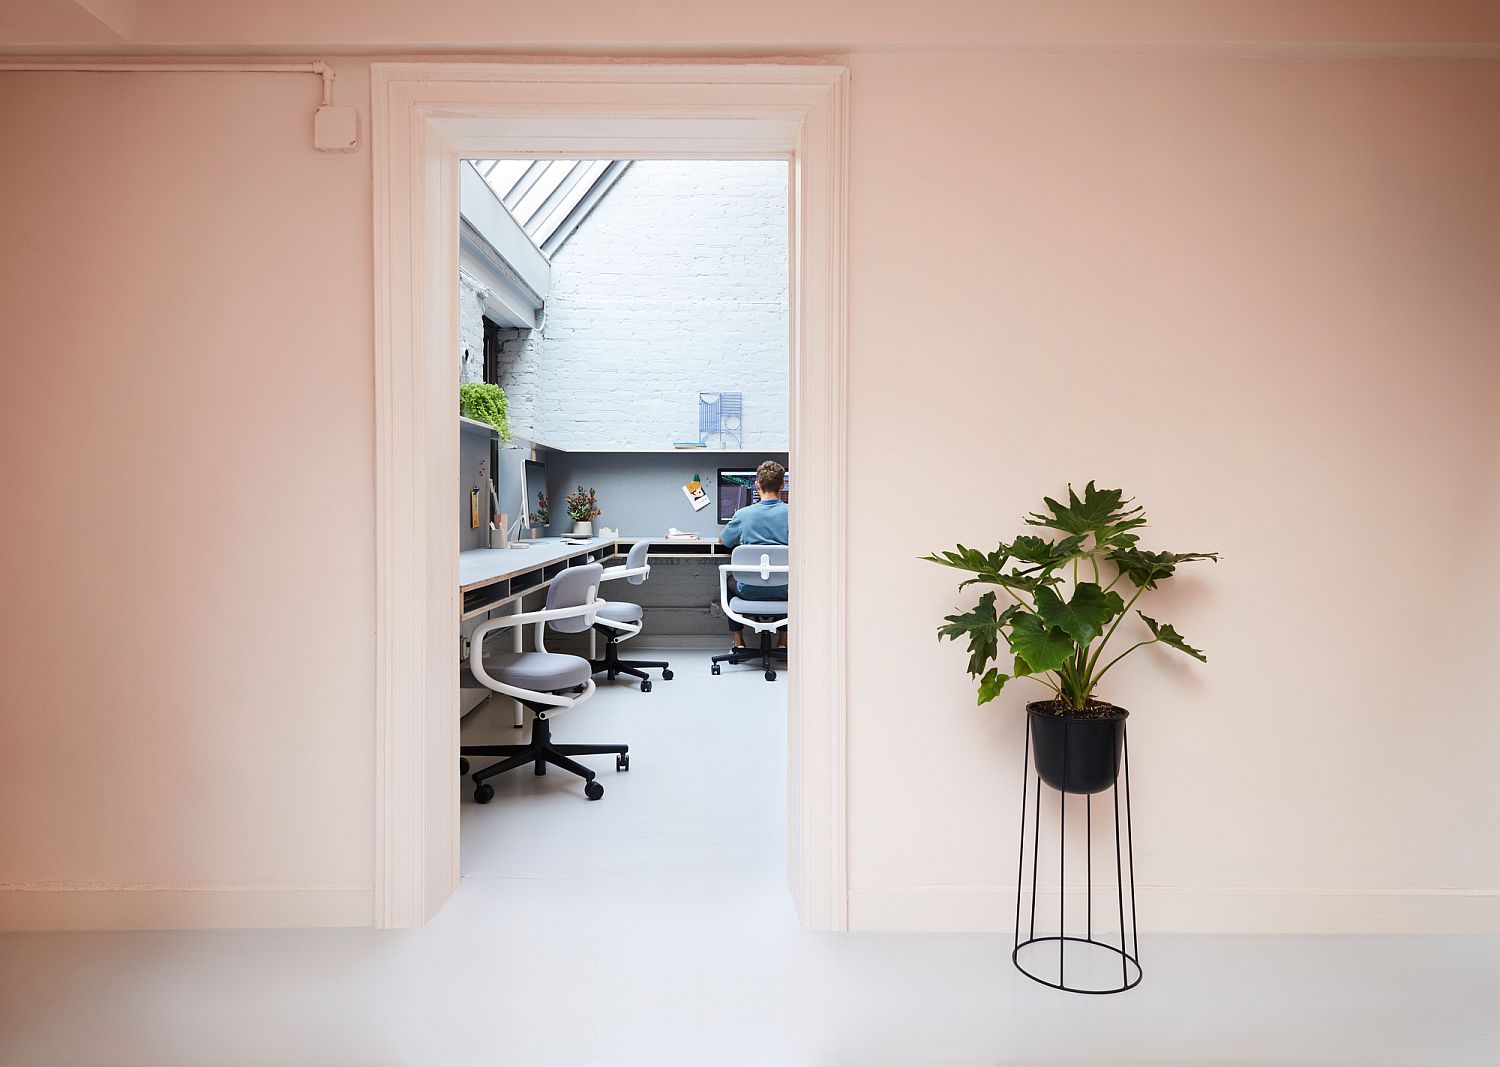 Walls draped in pastel pink create an inimitable office